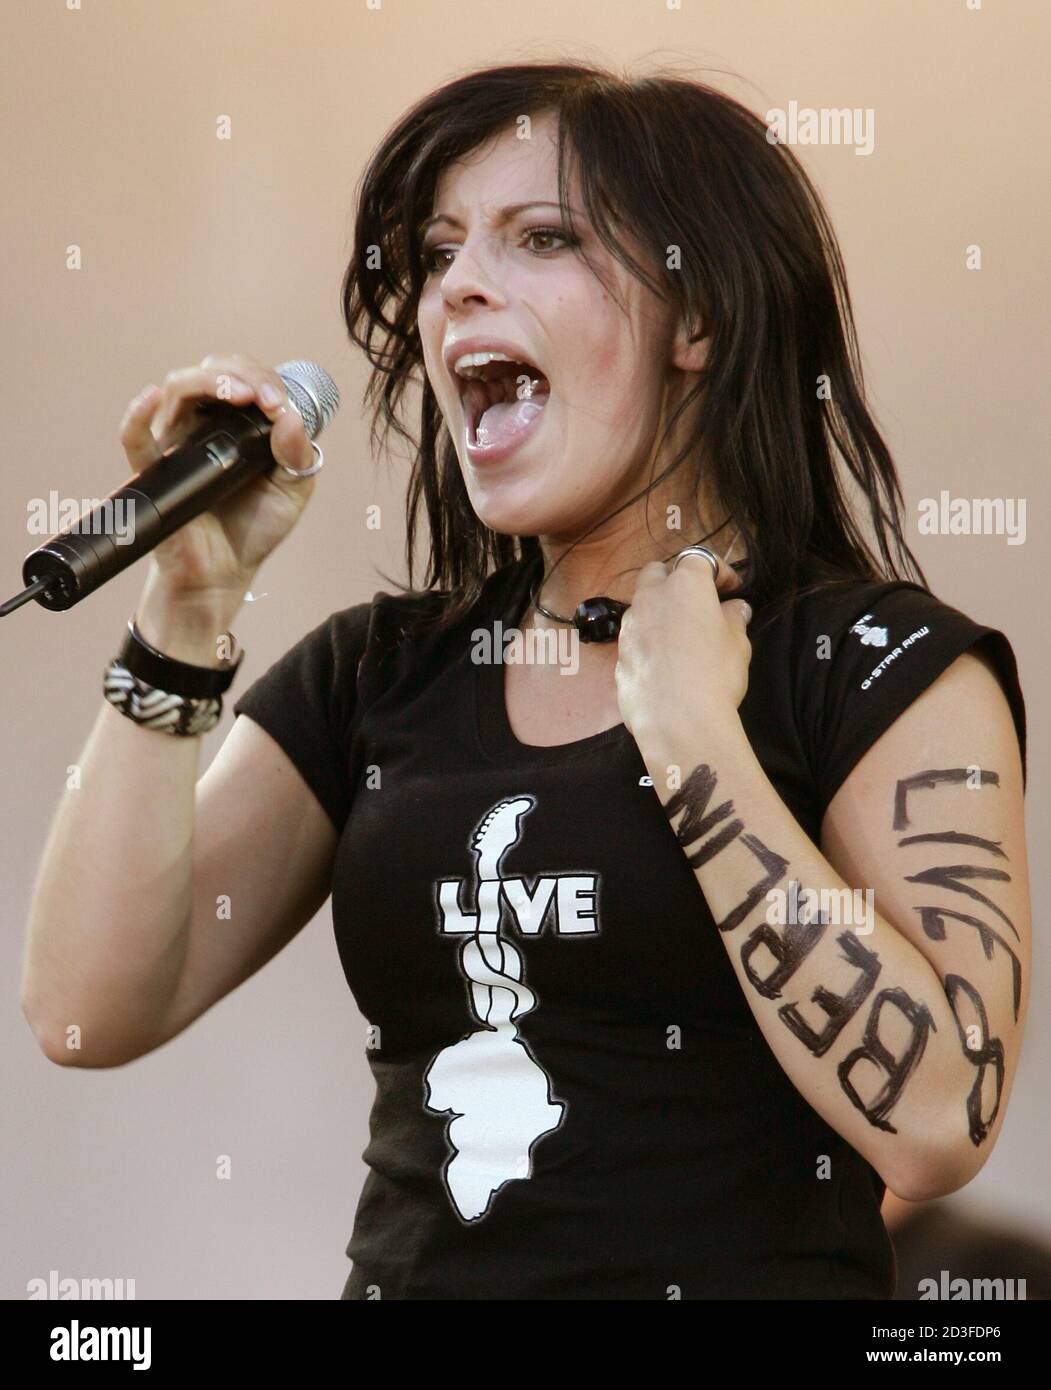 Lead singer Stefanie Kloss of German rock band 'silbermond' performs during  the Live 8 concert in Berlin, July 2, 2005. A galaxy of rock and roll stars  will grace stages across the